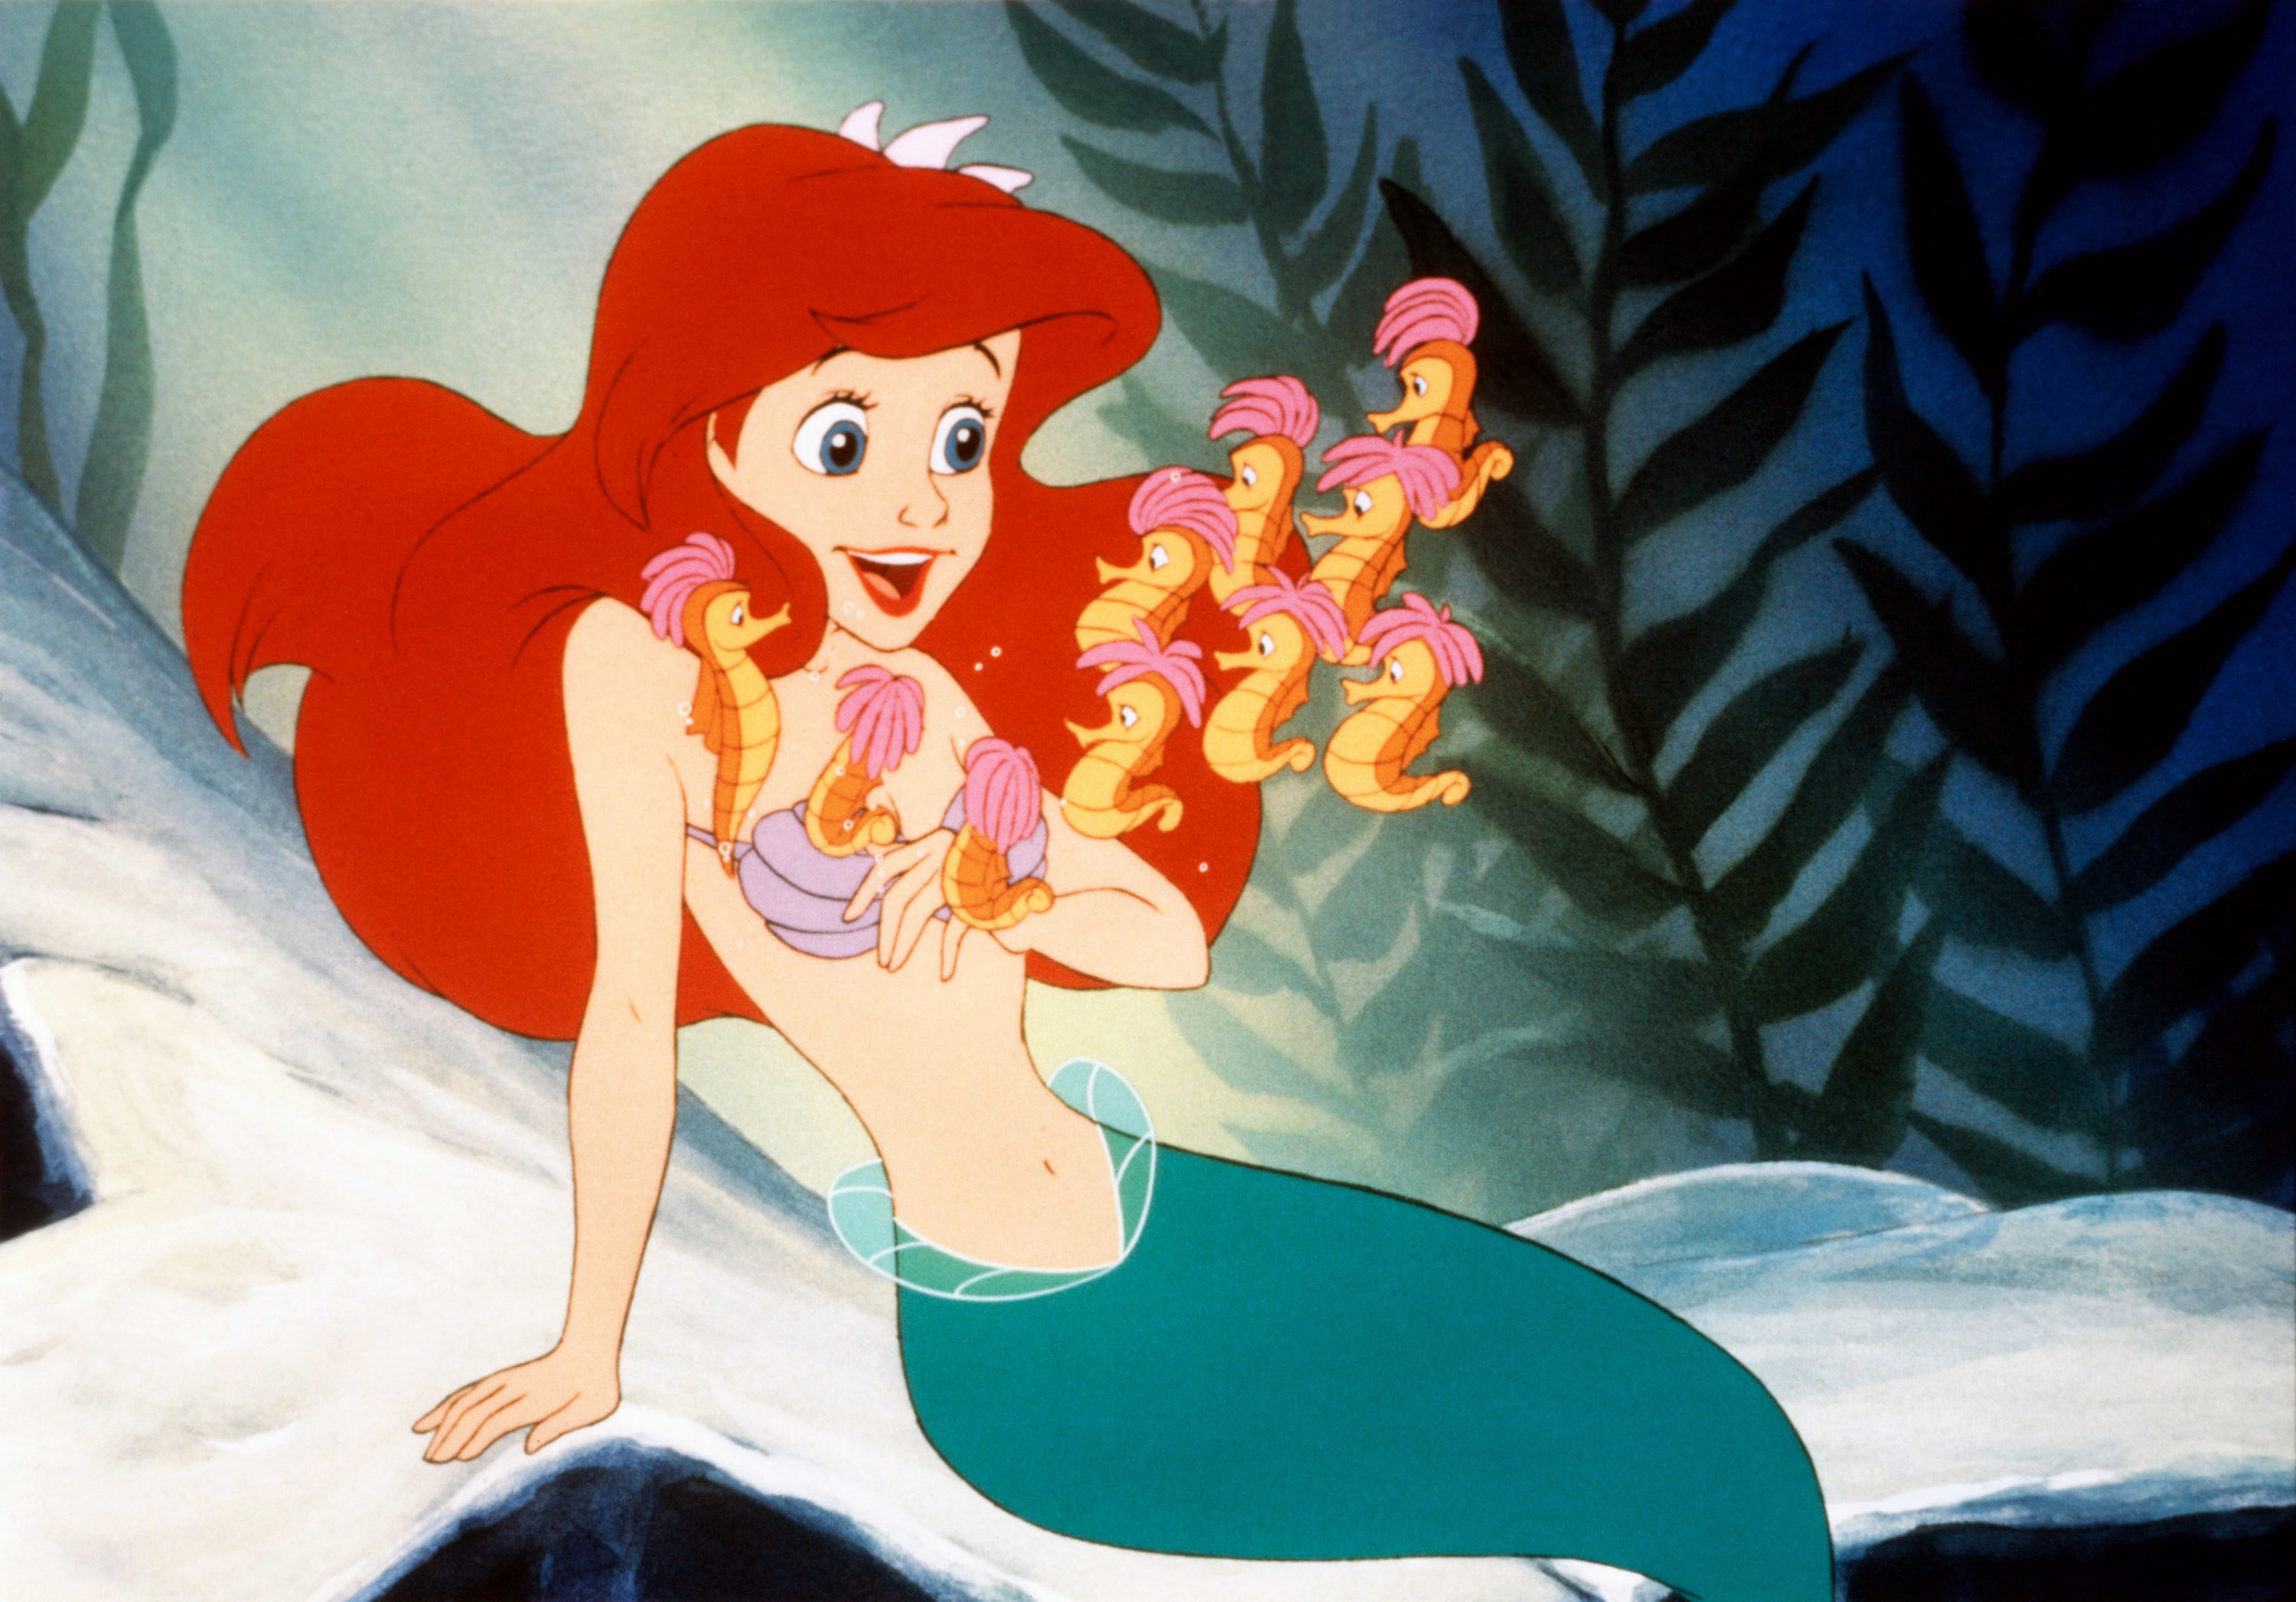 The animated Ariel